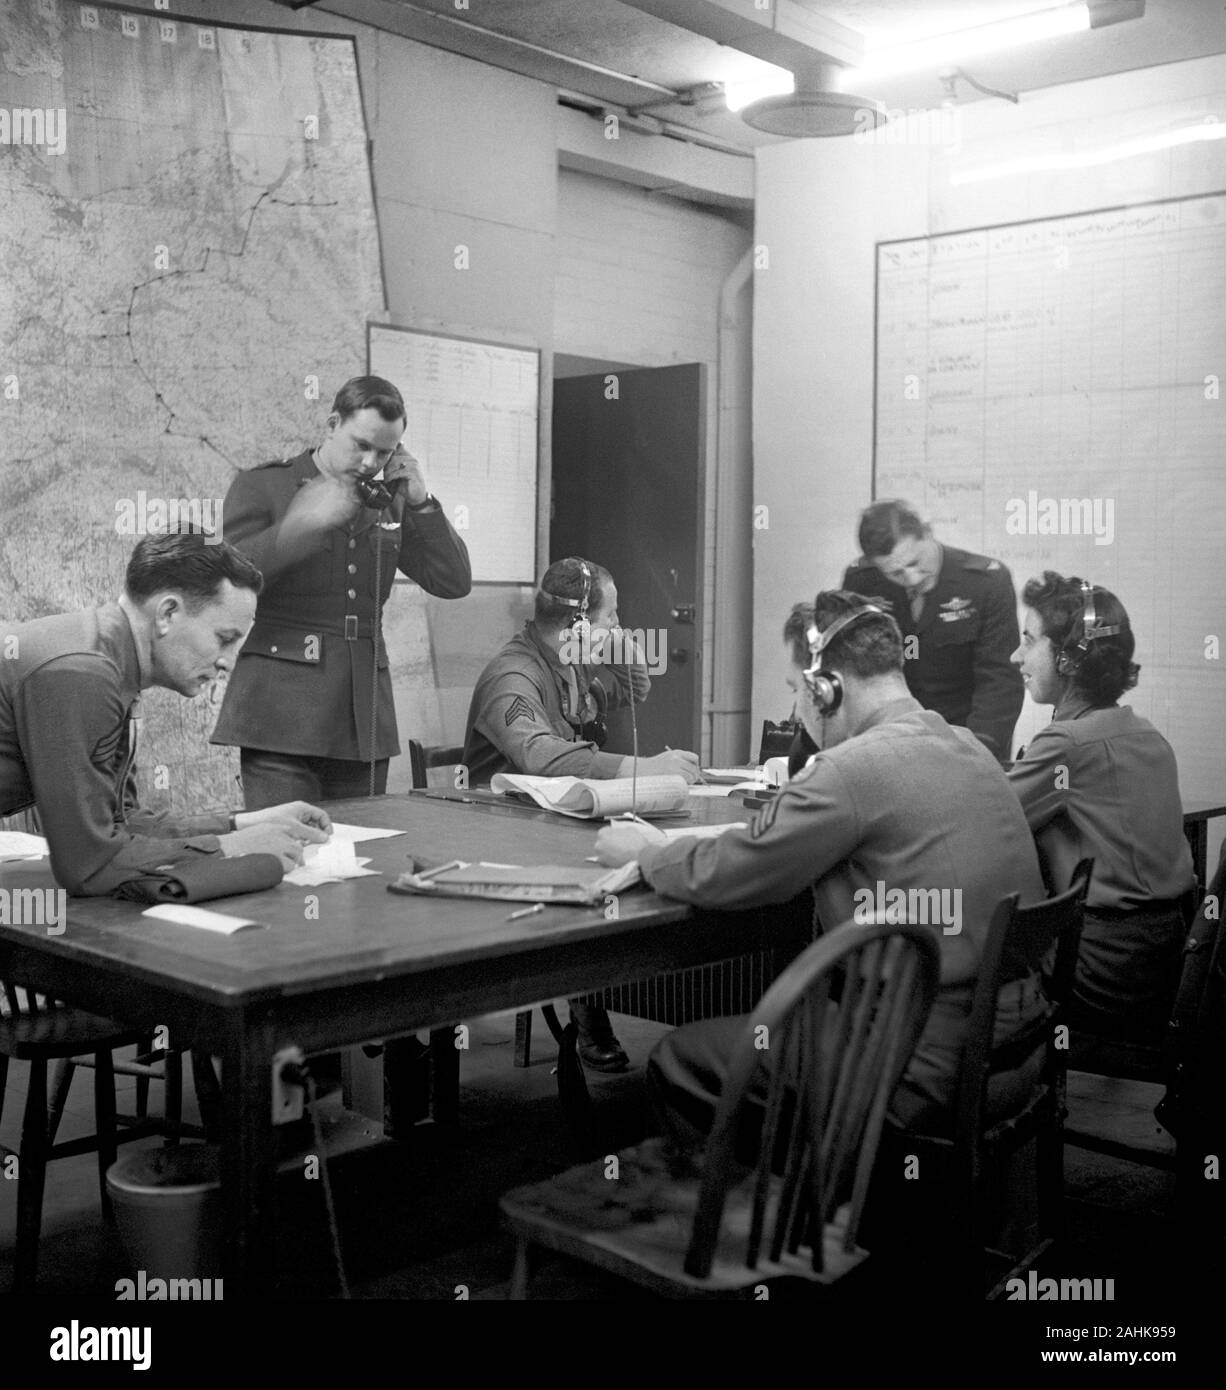 Military Officers and staff including a Woman, Staff Sergeant Dorothy Clark, seated around Table in U.S. 8th Air Force Headquarters Operation Room, possibly outside London, England, during World War II, photograph by Toni Frissell, January 1945 Stock Photo